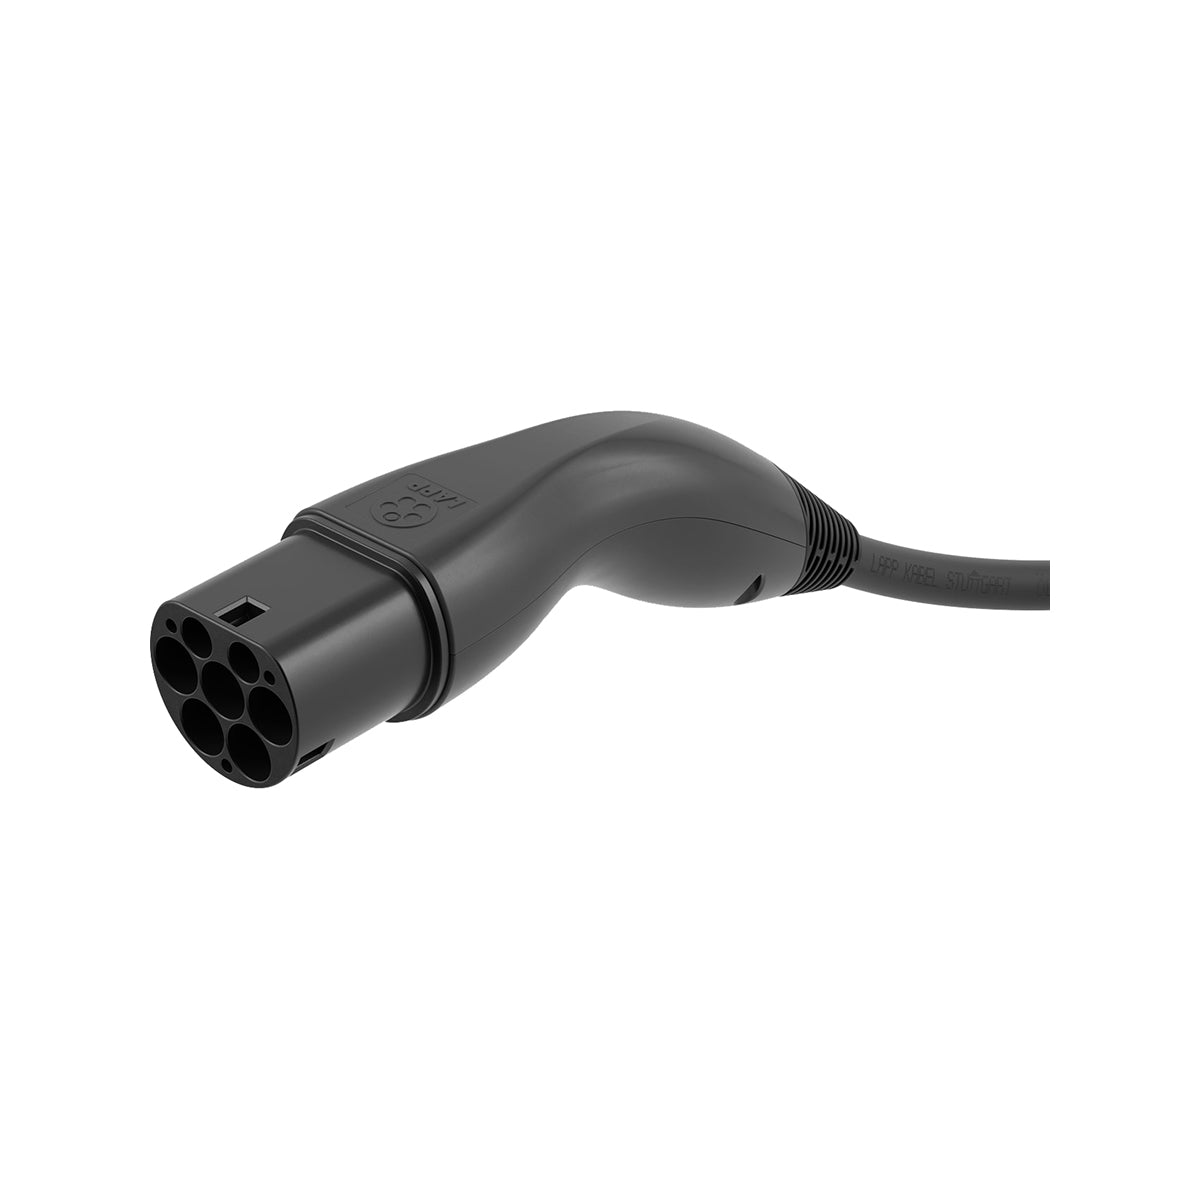 LAPP EV Helix Charge Cable Type 2 (11kW-3P-20A) 5m for Hybrid and Electric Cars - Black.